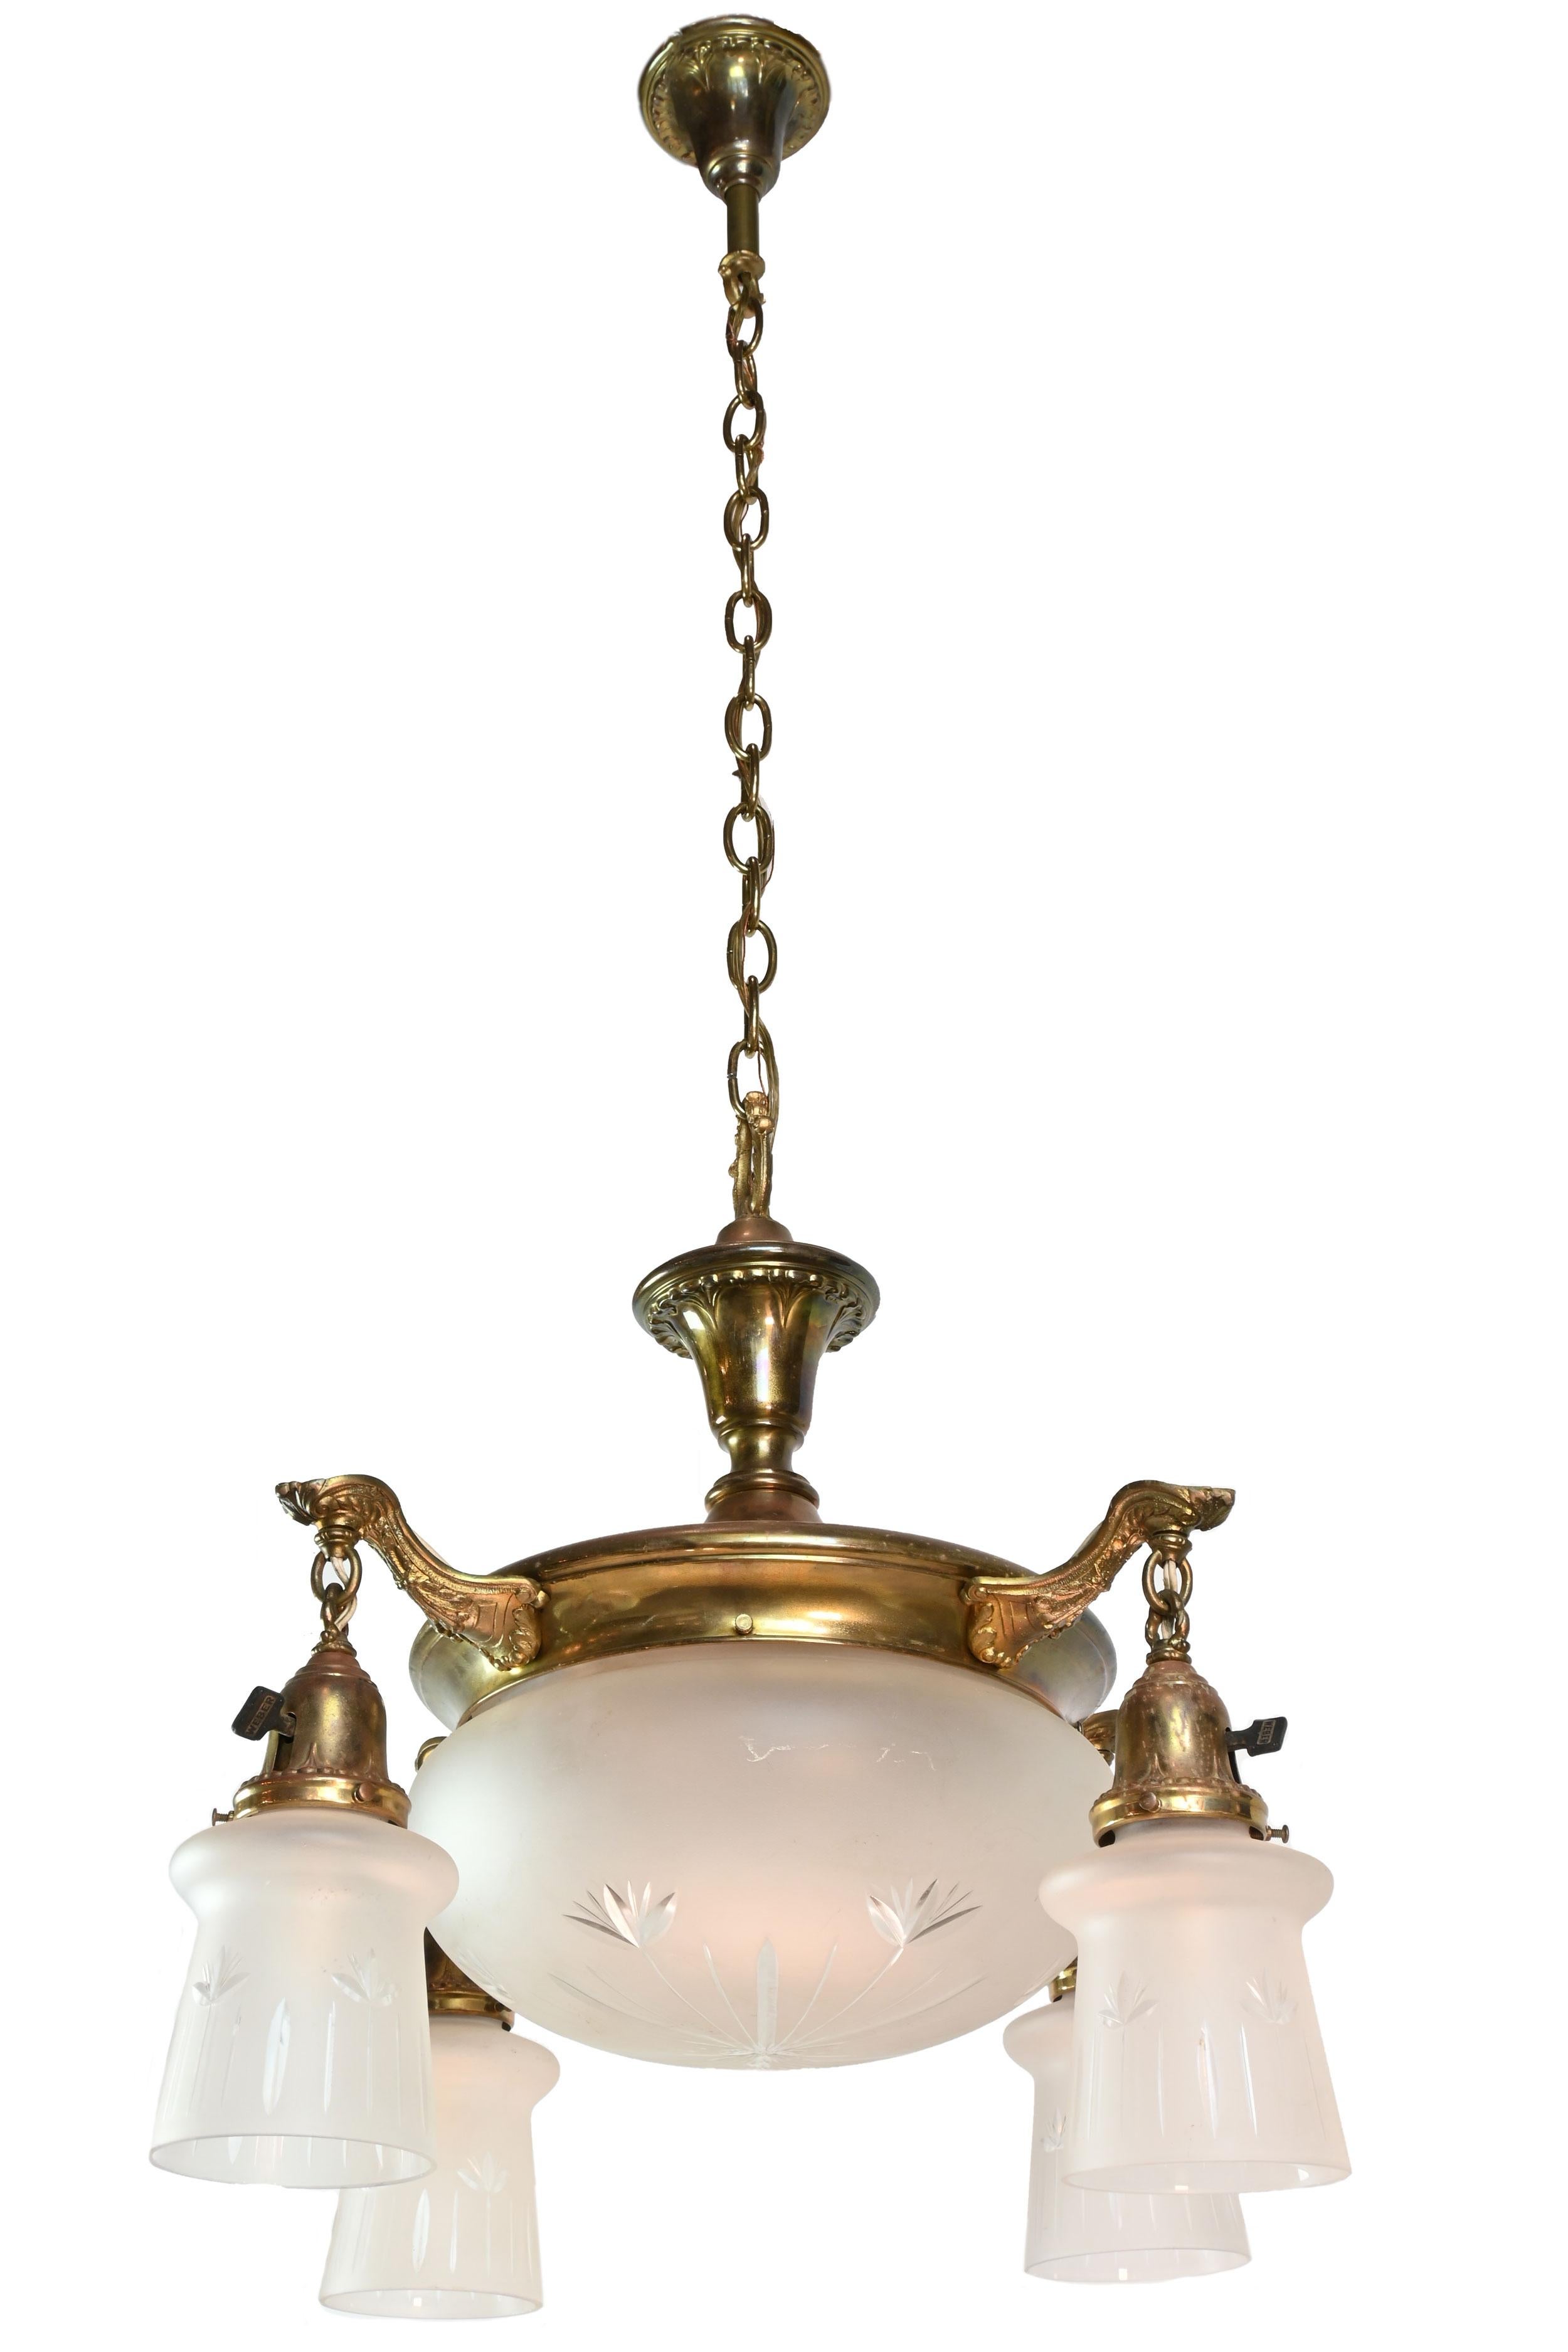 Lovely detail on this classic fixture. The etched shades feature a geometric floral pattern and each of the arms can be turned off separately from the main bowl. The beautiful organic detailing in the arms is matched by the rainbow colors of the